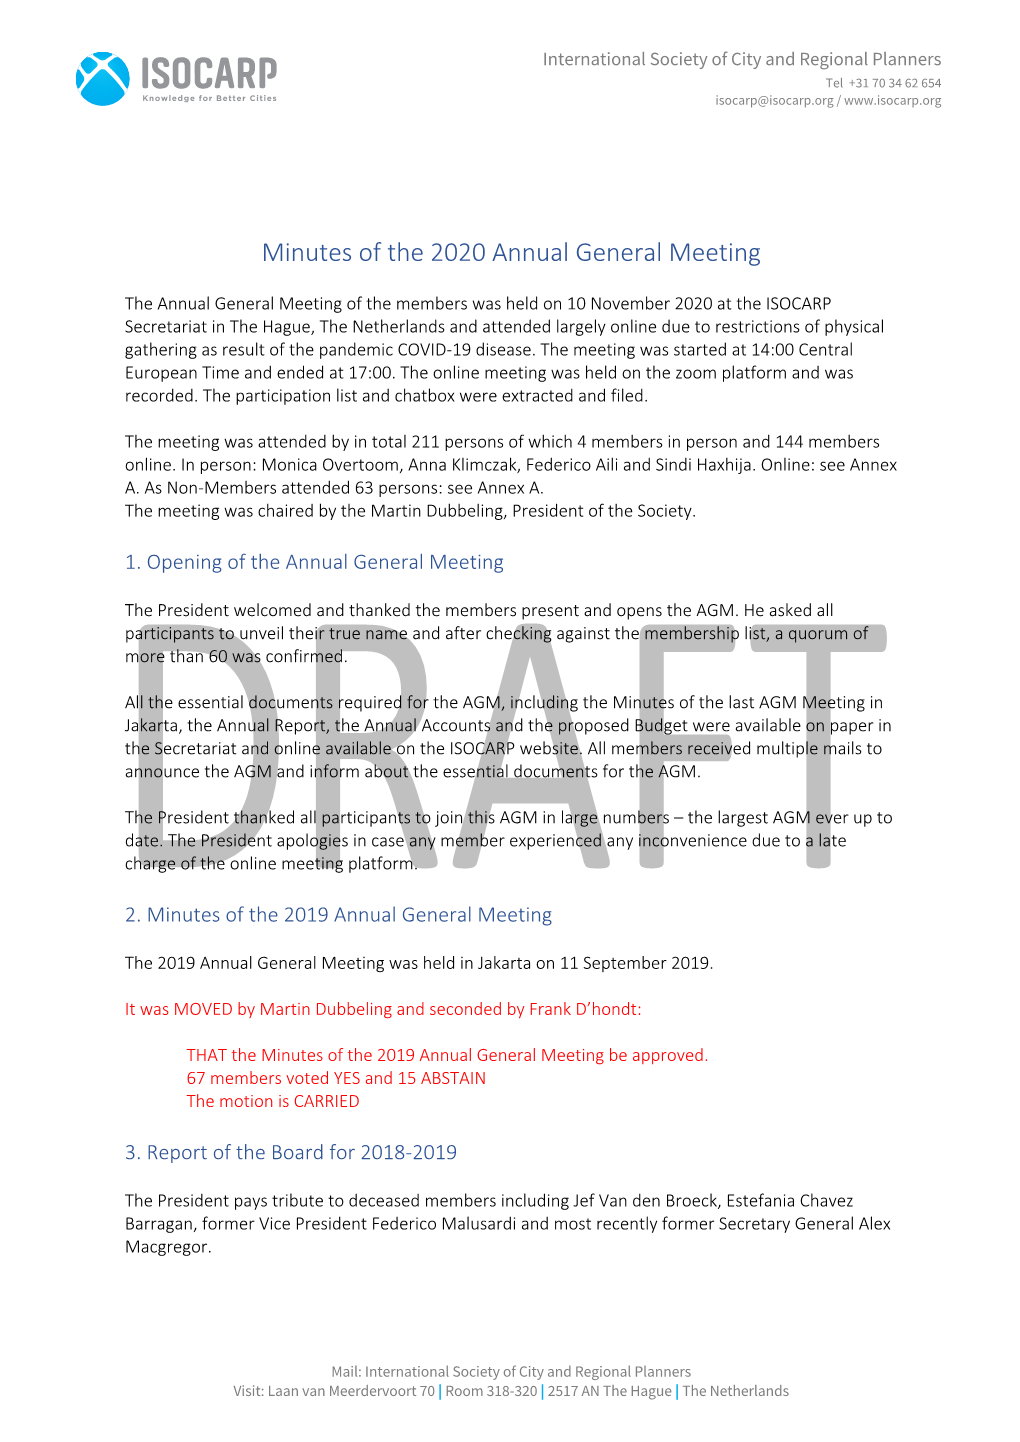 Minutes of the 2020 Annual General Meeting